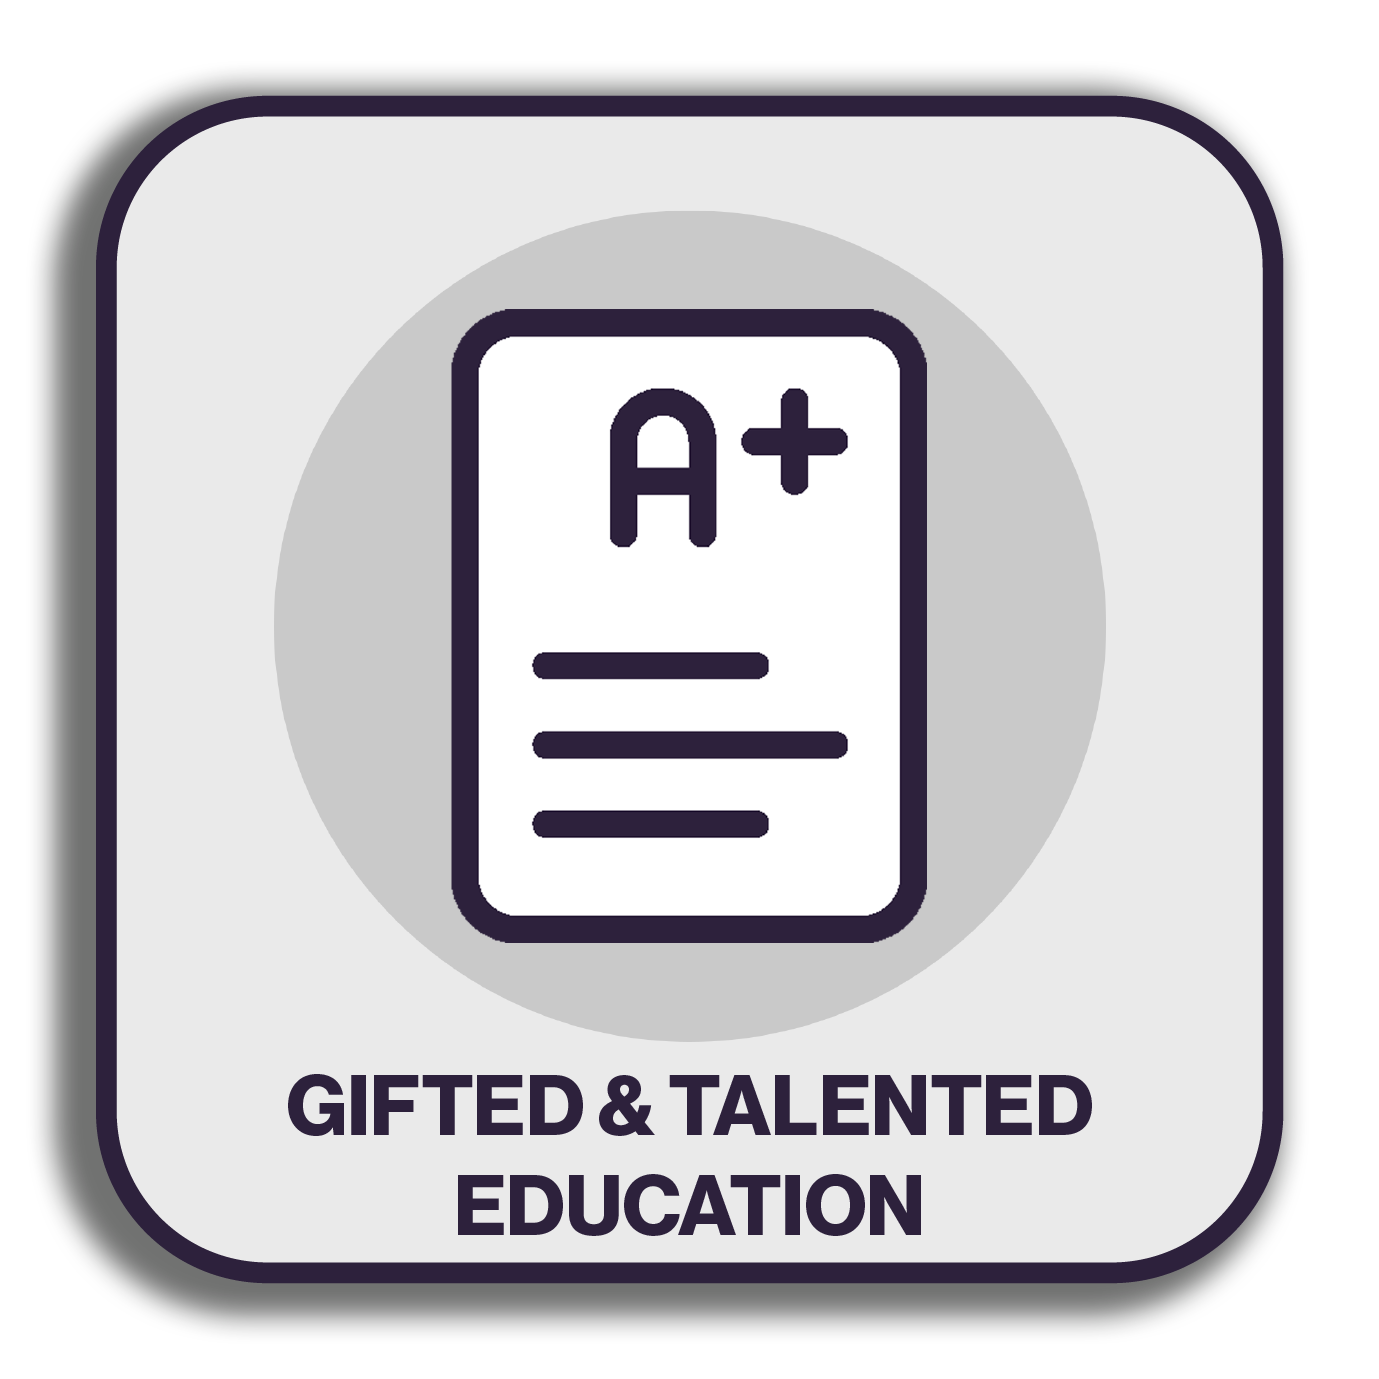 Gifted & Talented Education